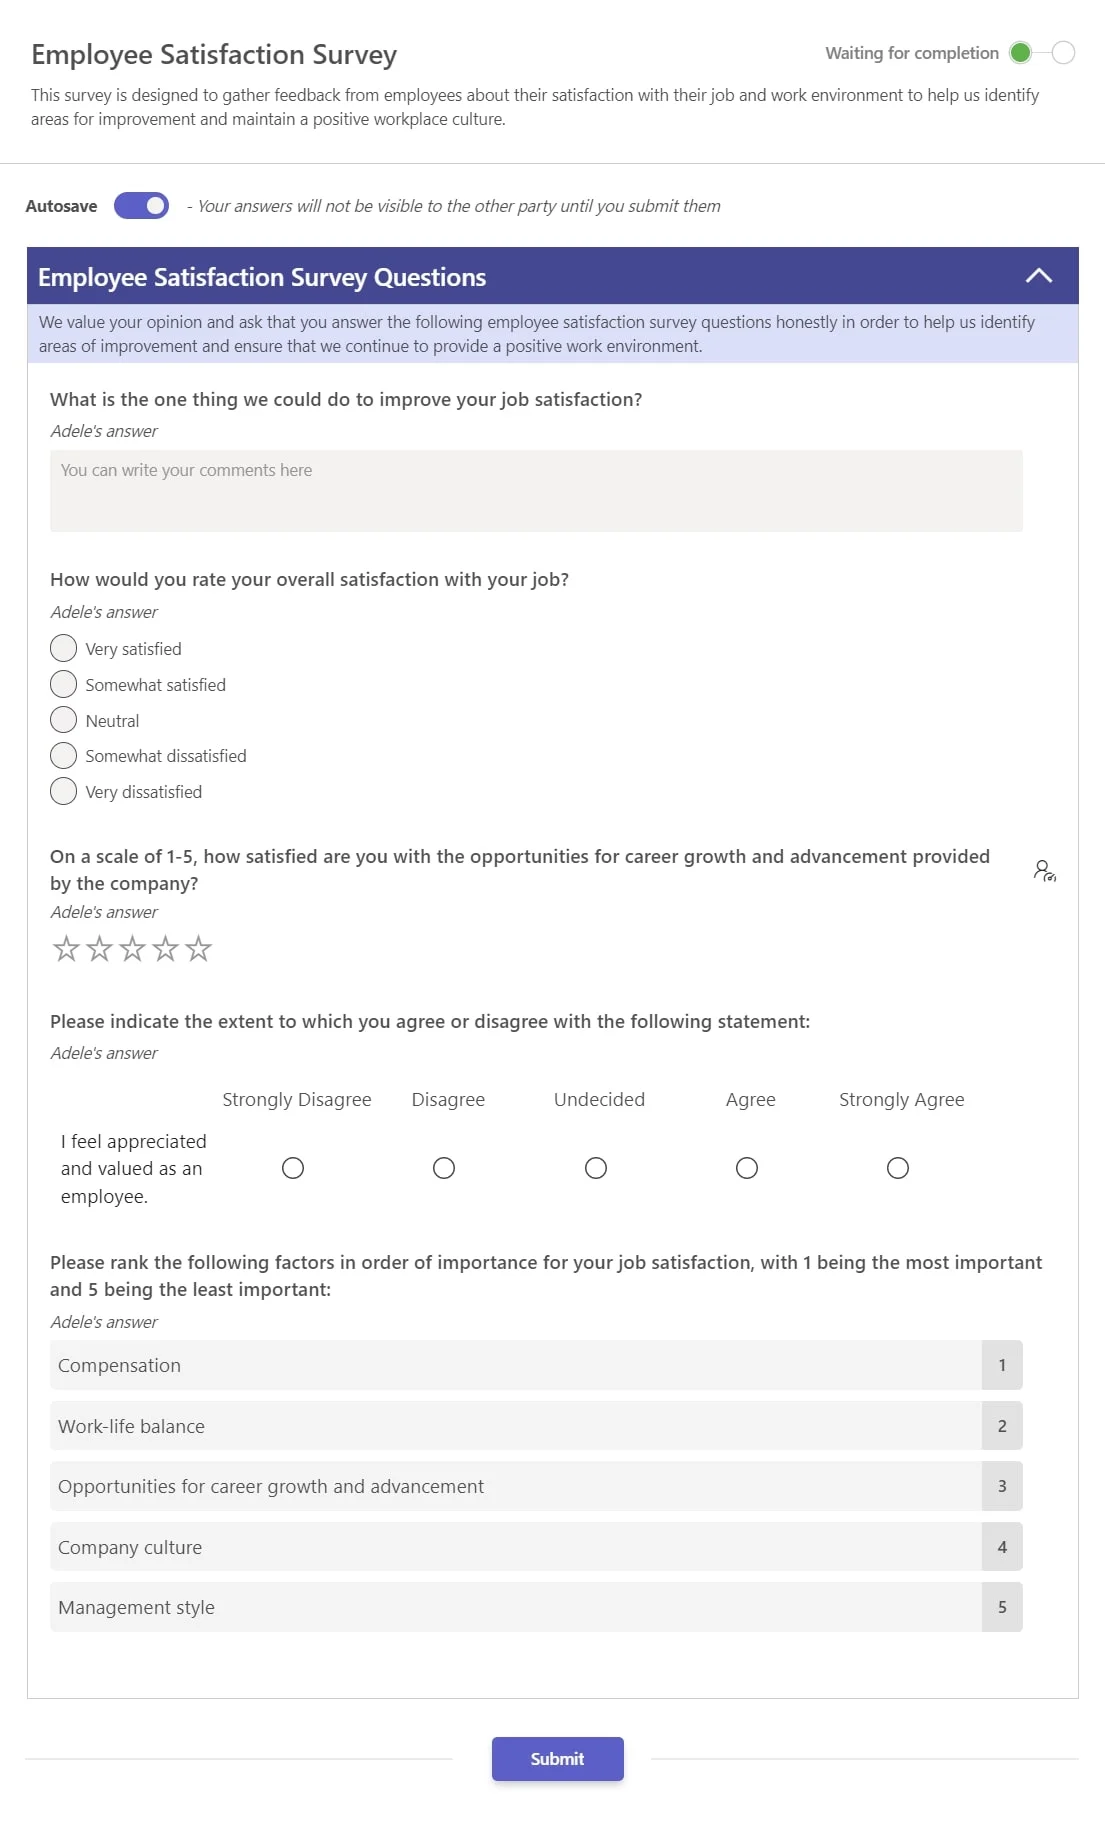 teamflect employee satisfaction survey template with questions